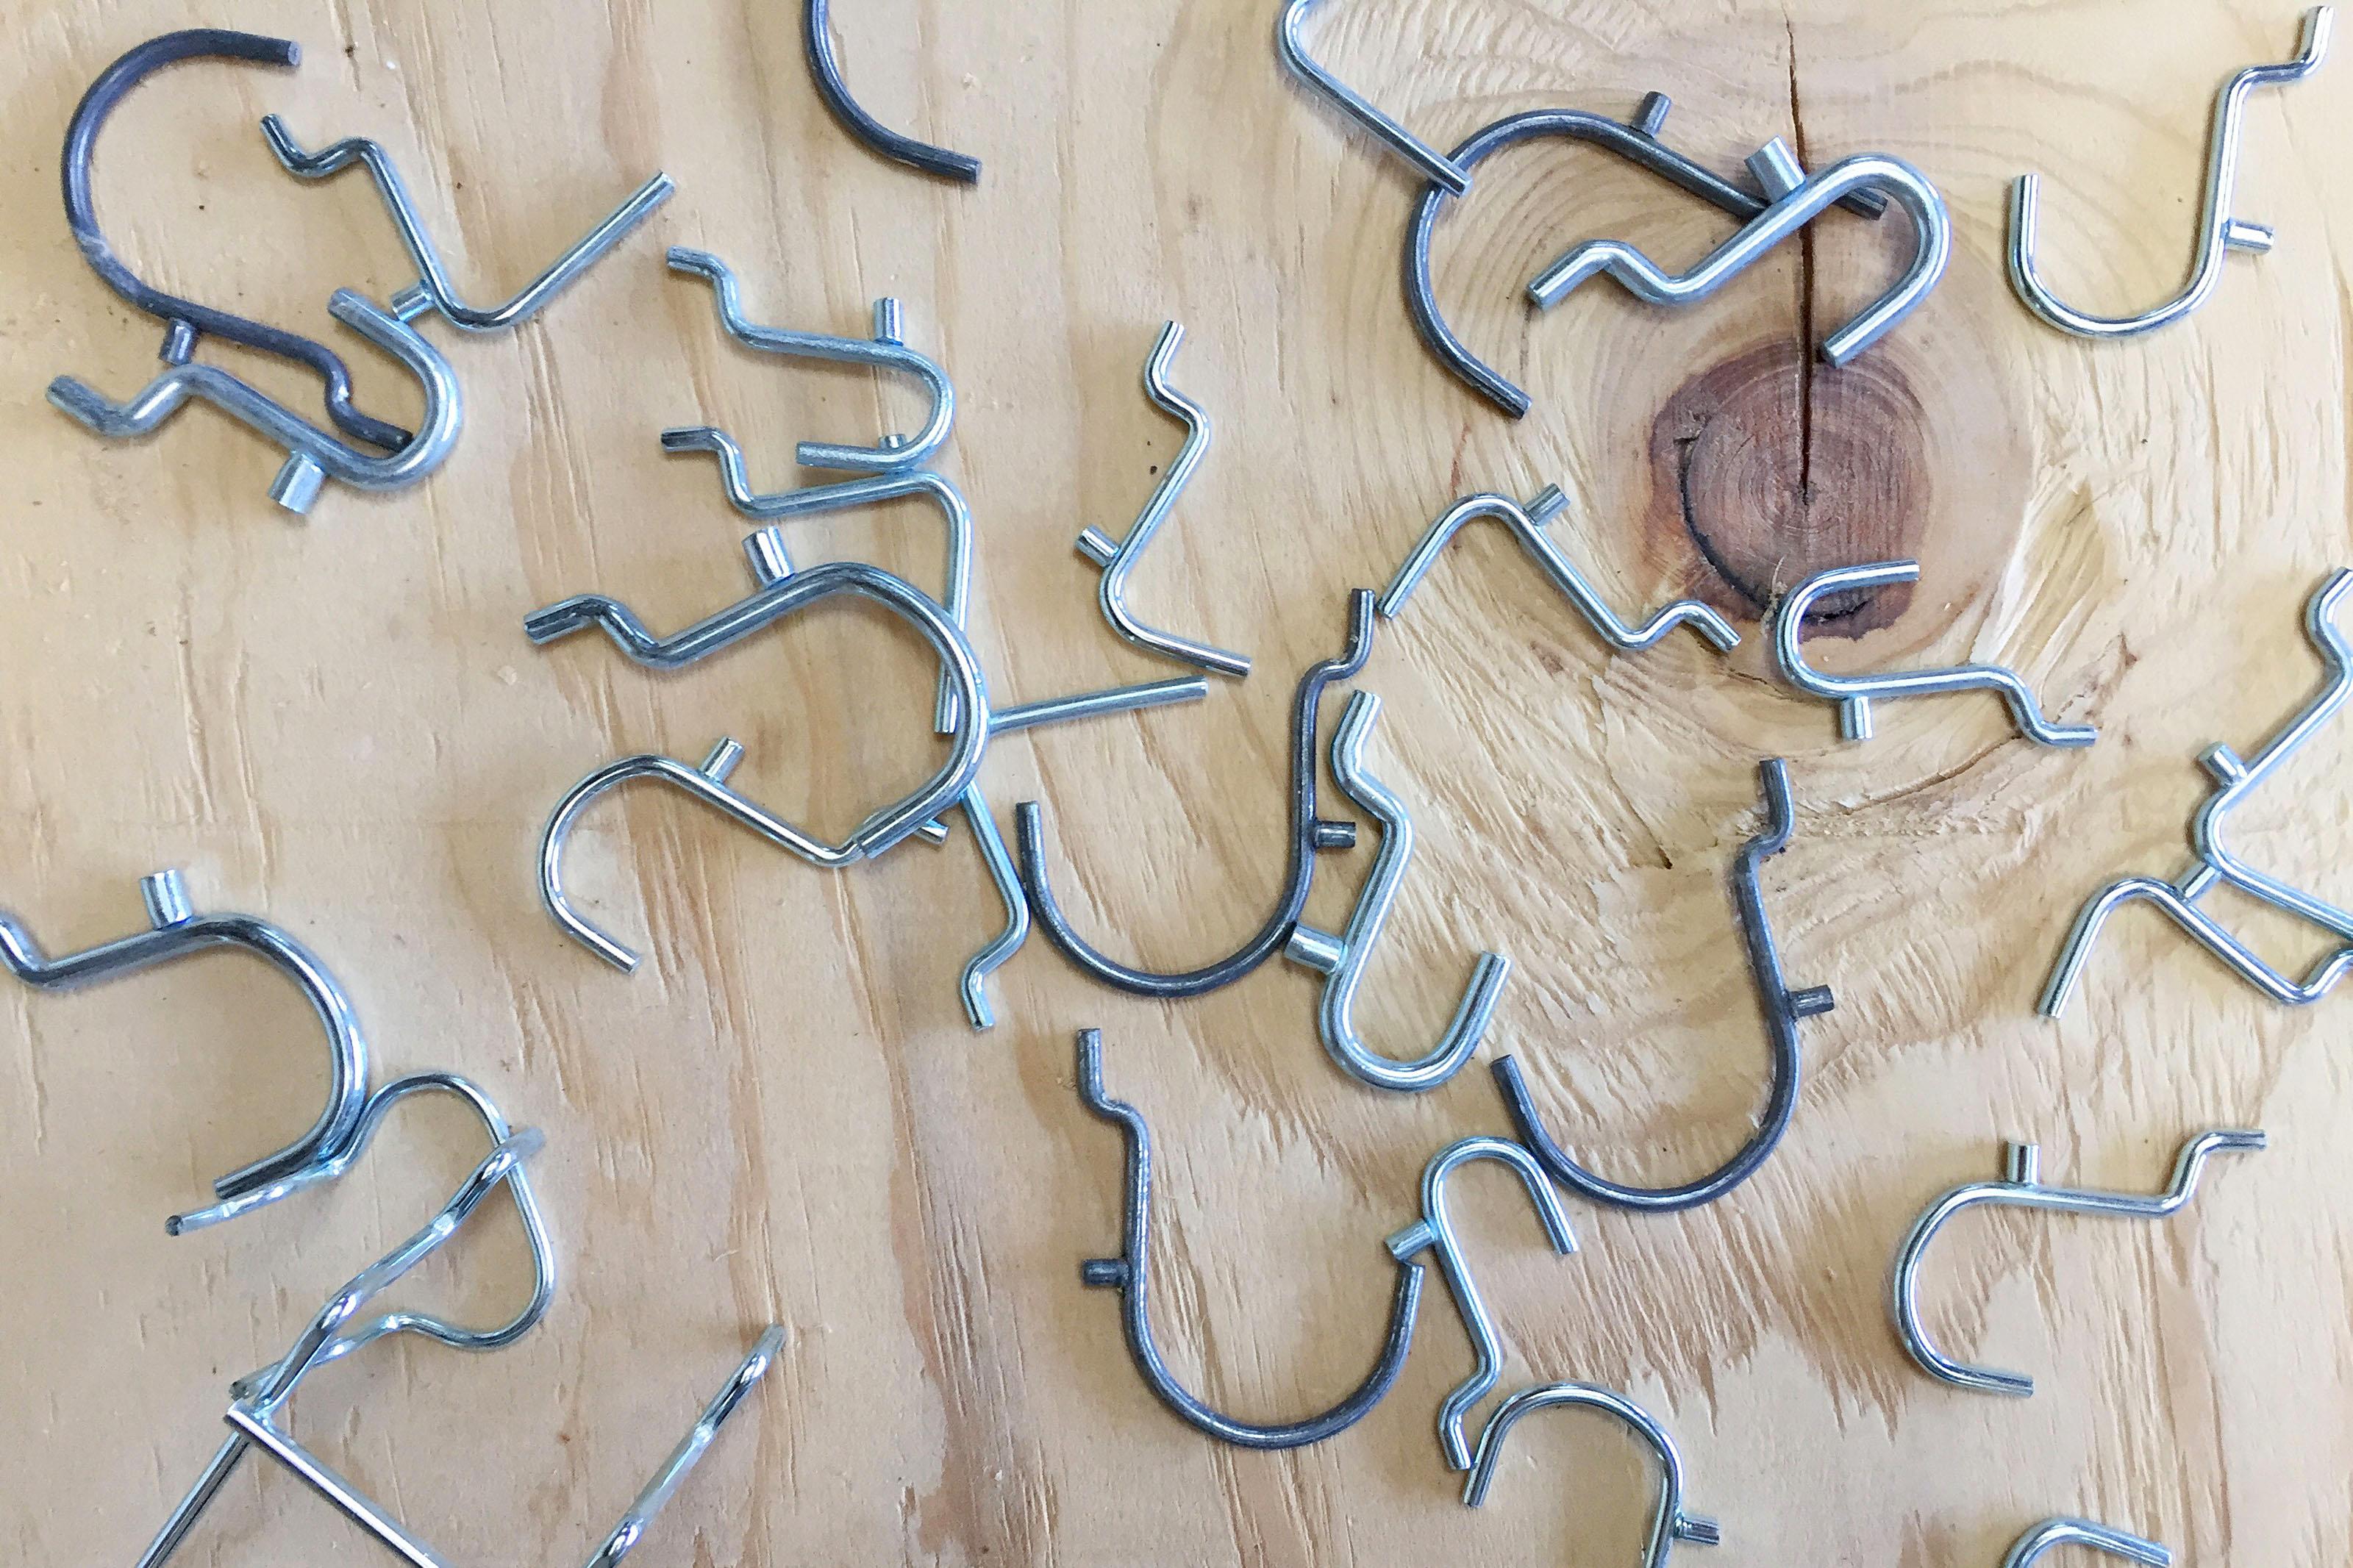 Organizing Made Fun: How to Hide Messy Cords with Pegboard